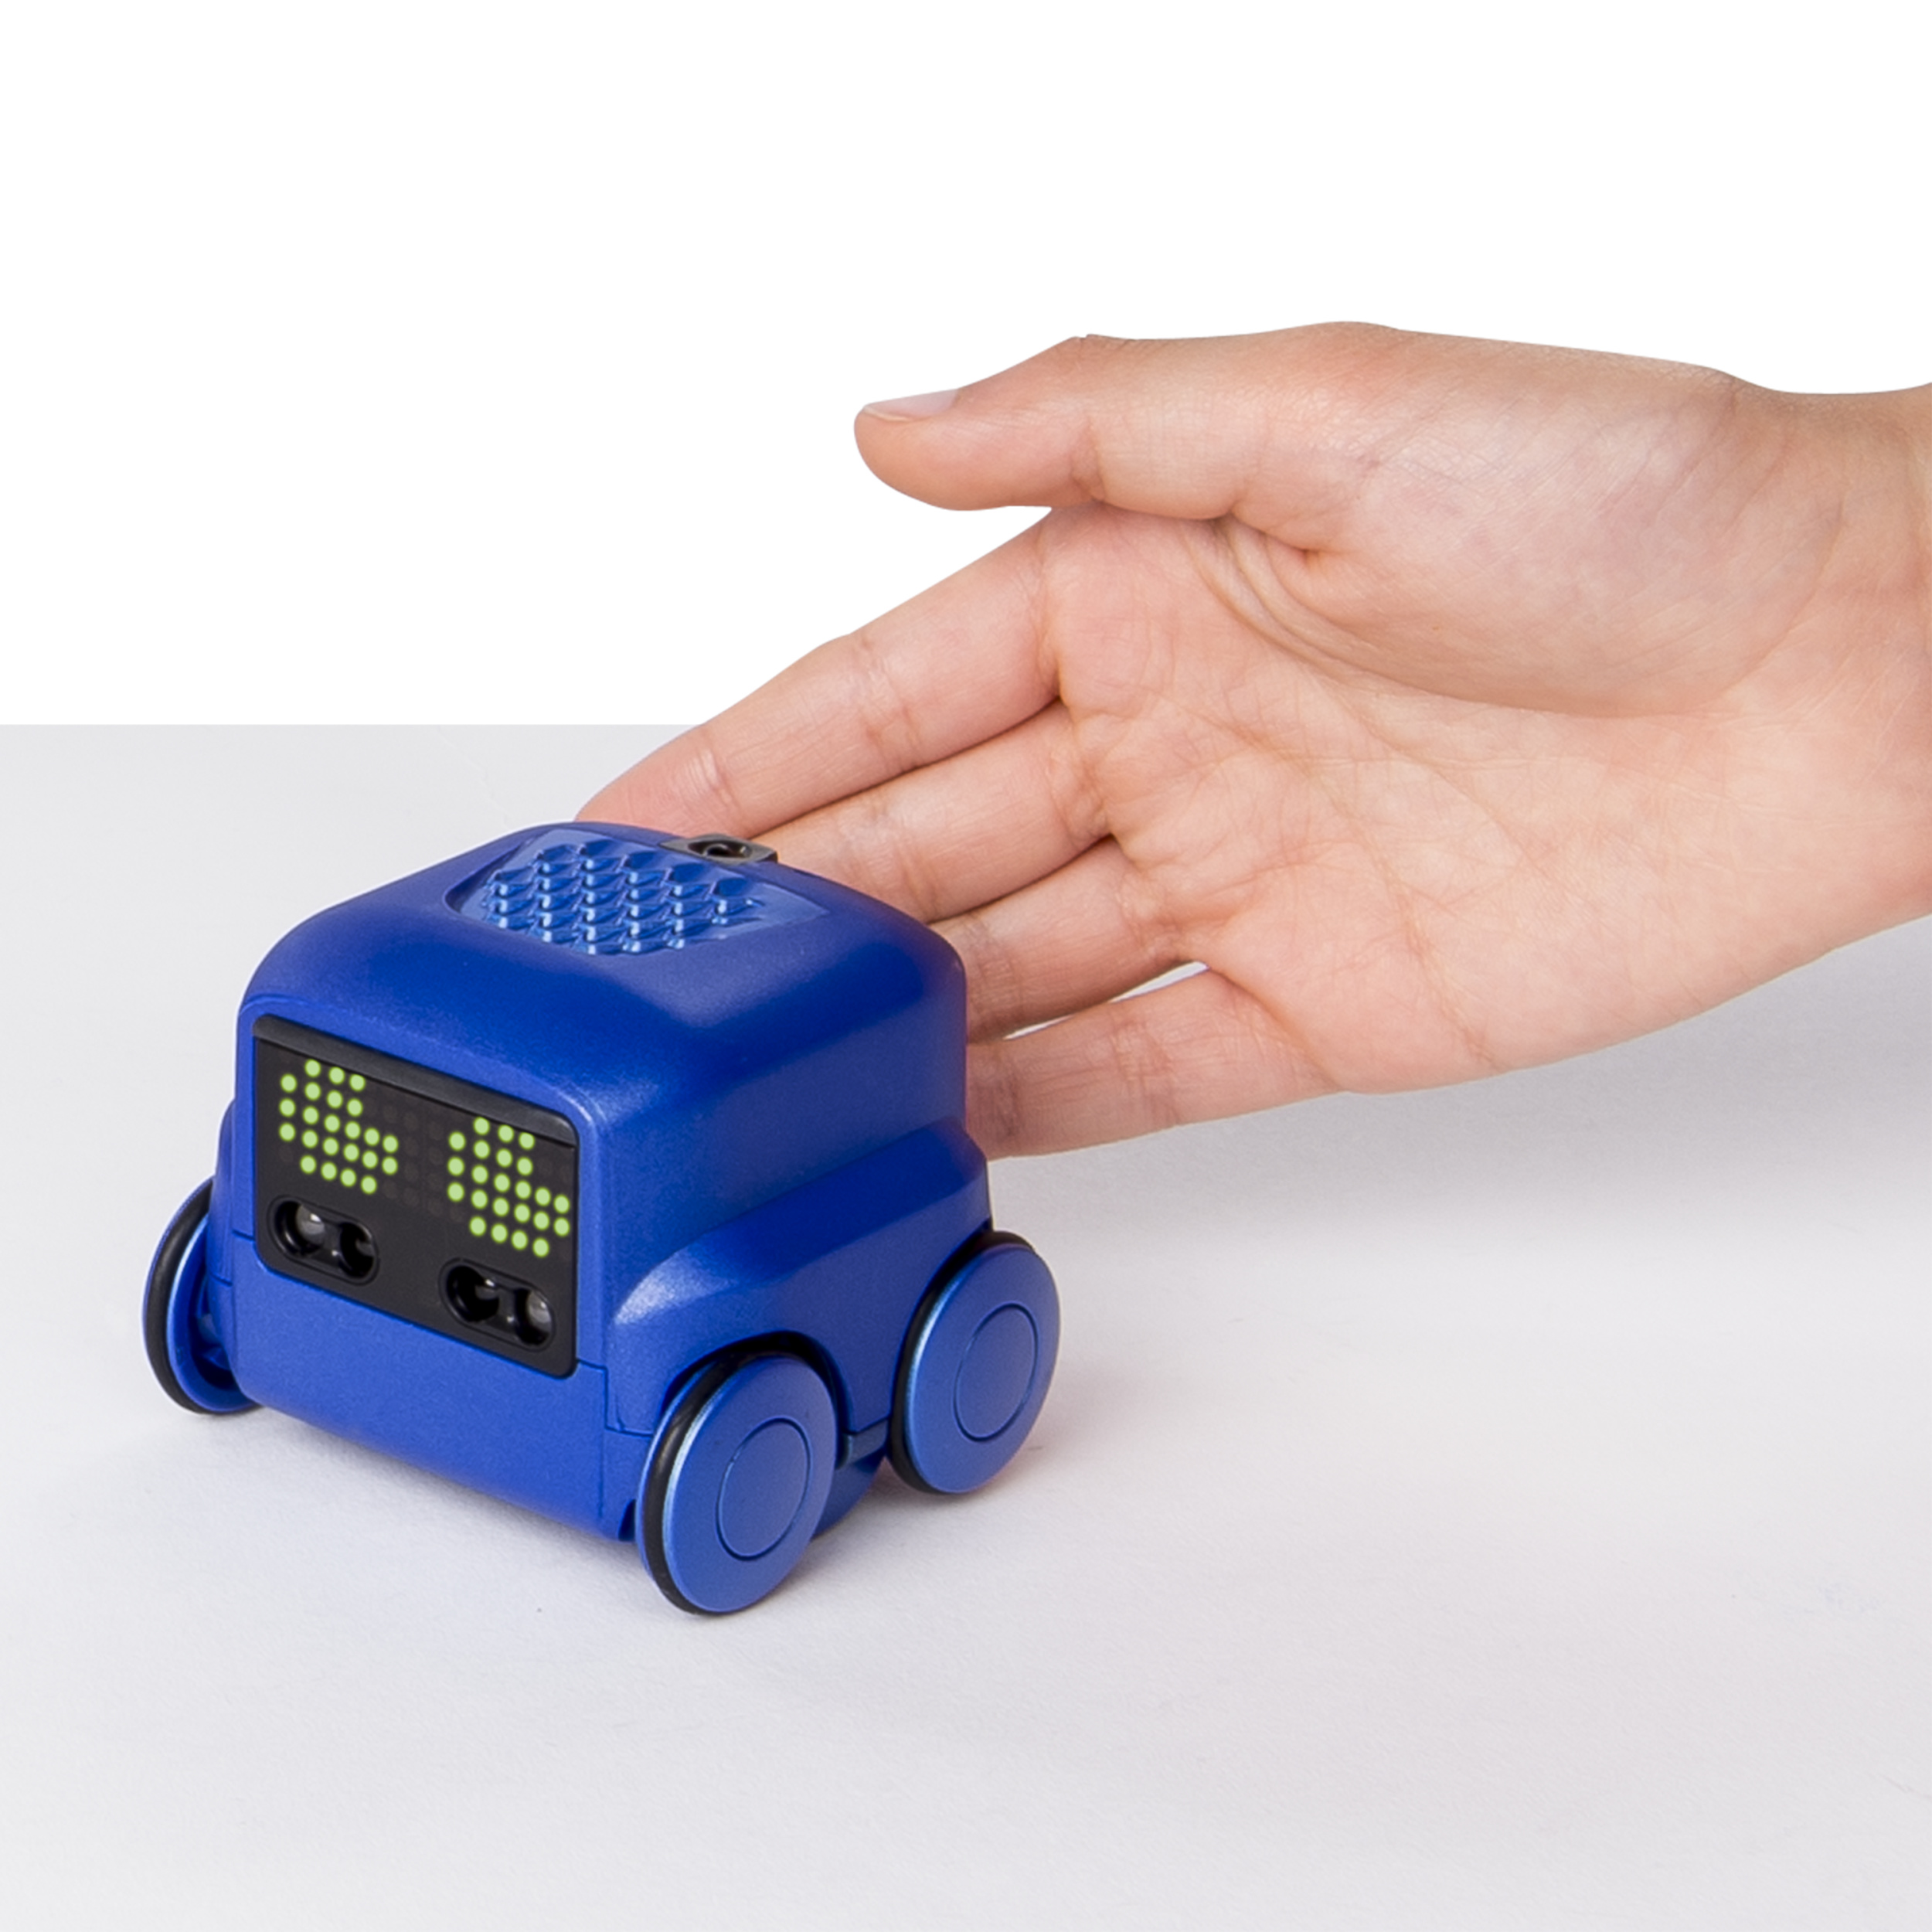 Boxer - Interactive A.I. Robot Toy (Blue) with Personality and Emotions, for Ages 6 and up - image 5 of 14